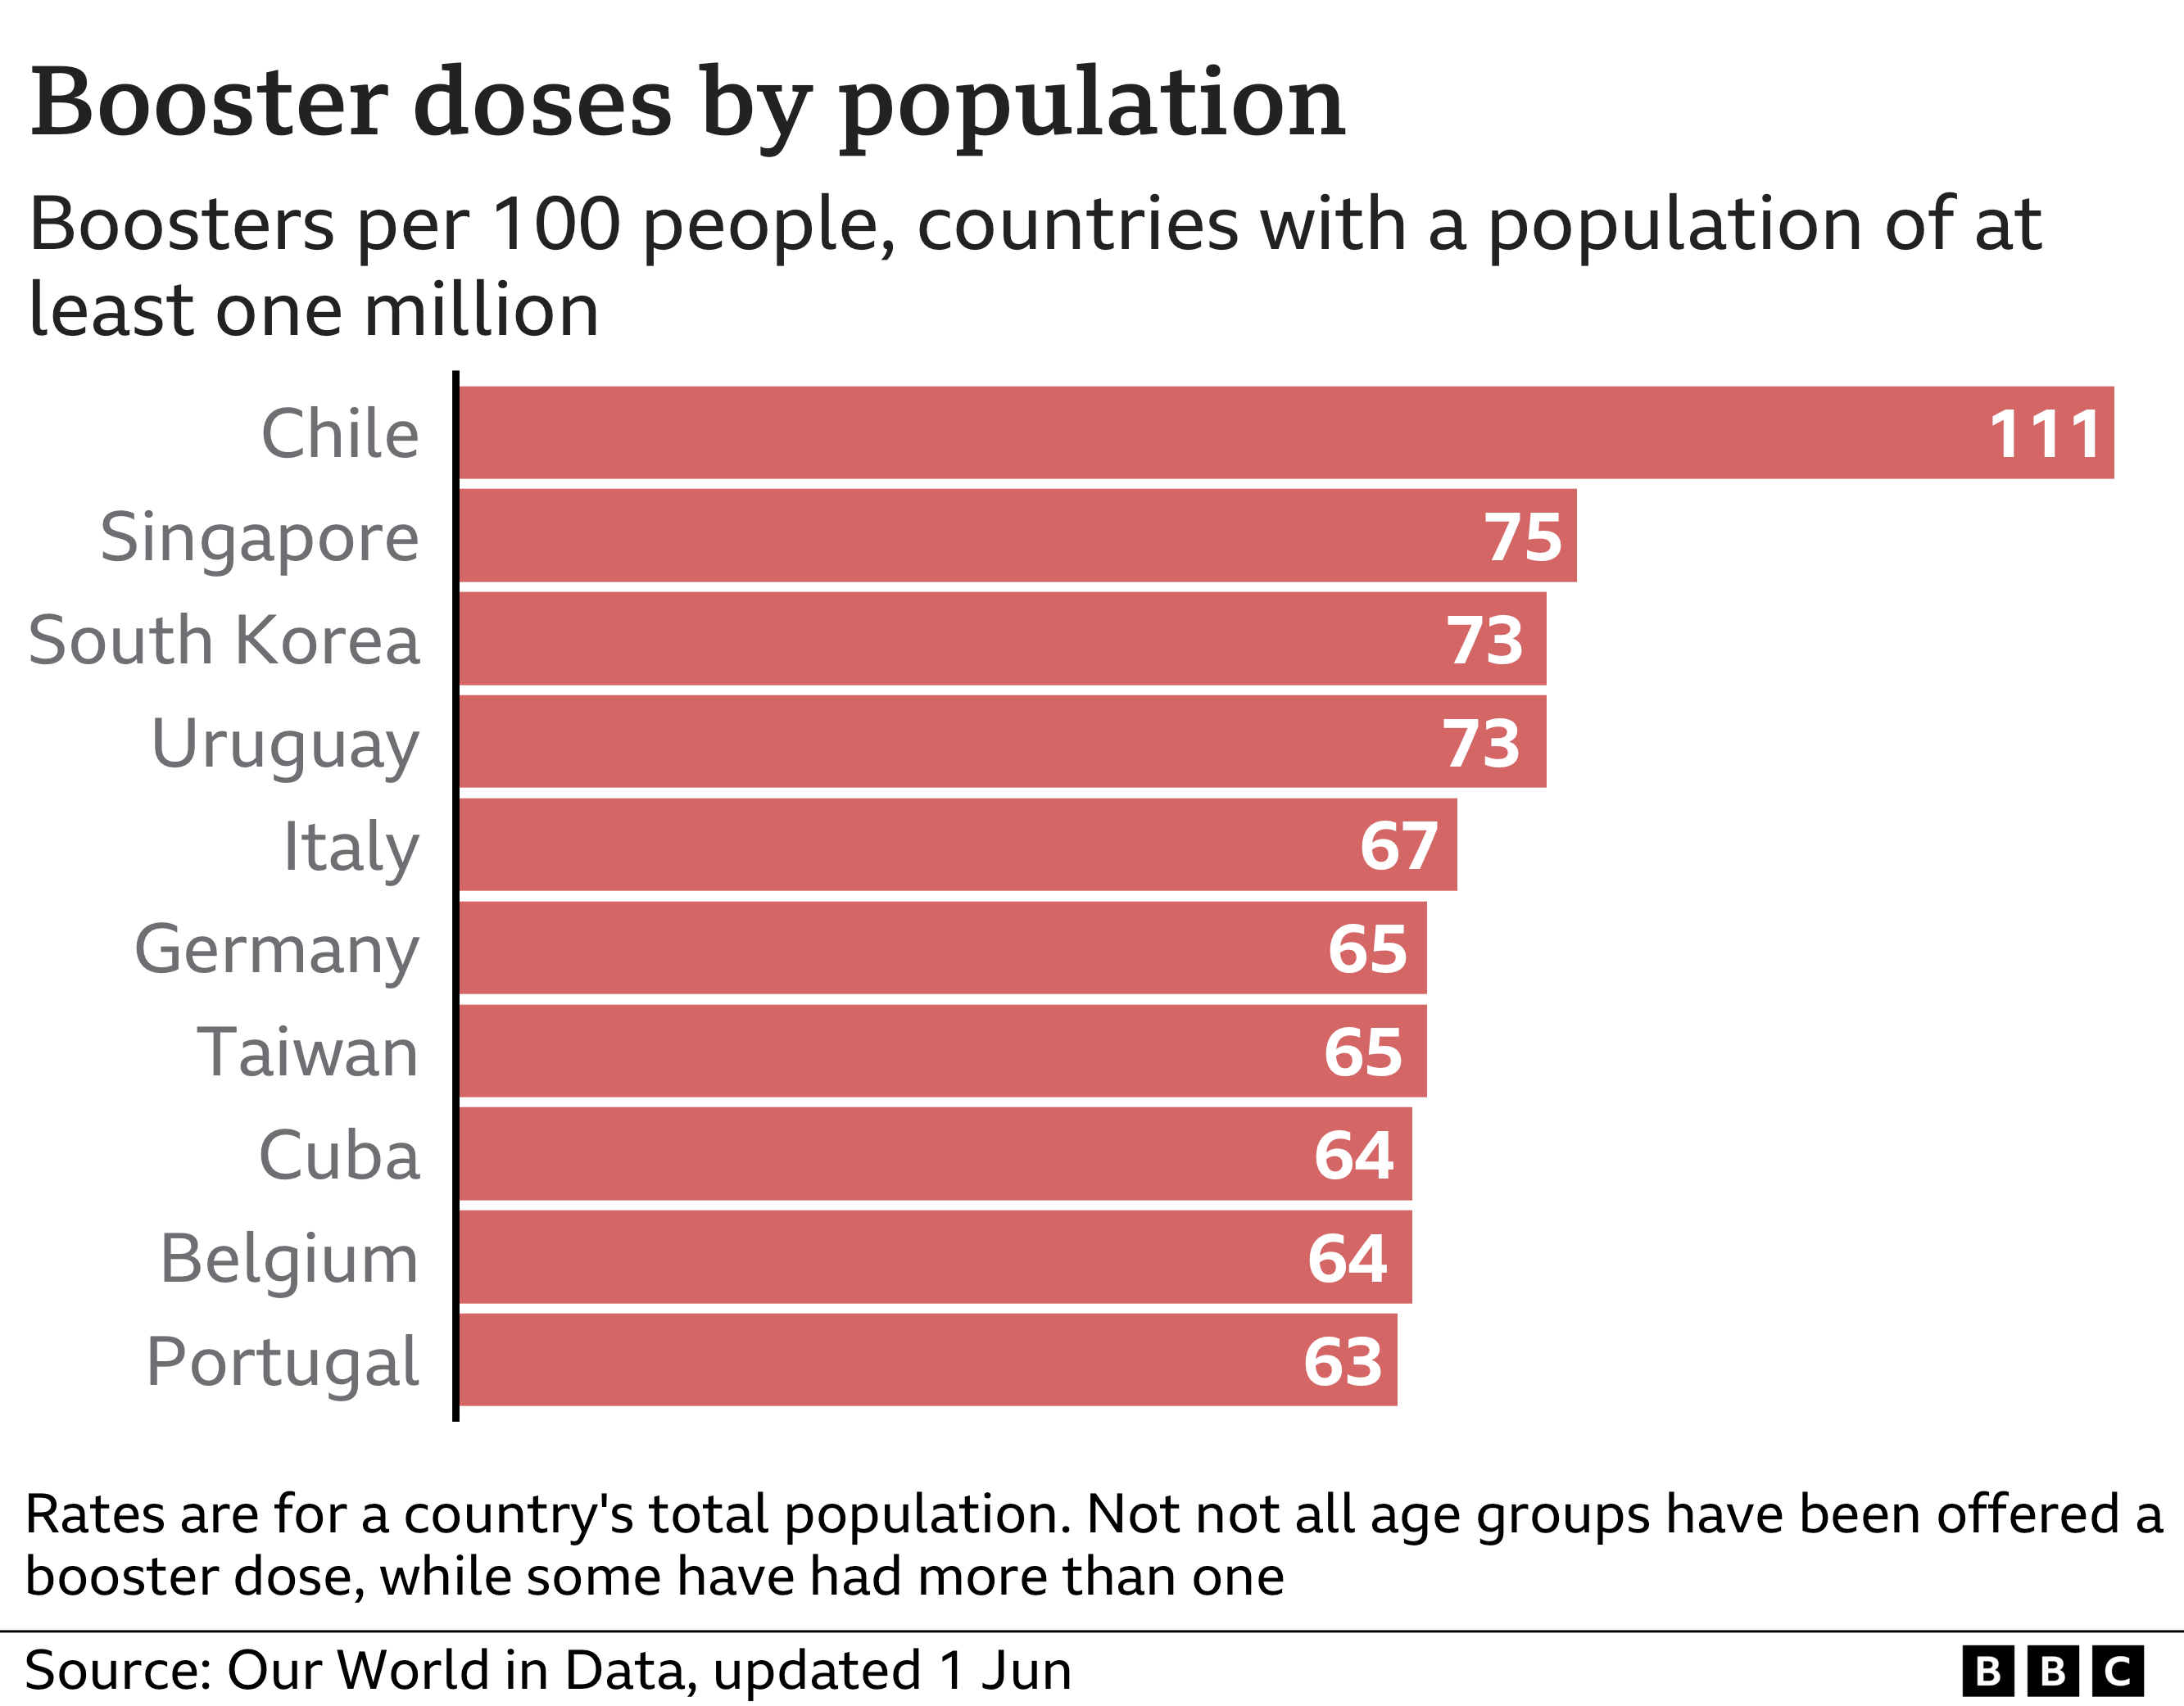 chart showing the countries with the highest booster vaccine doses per 100 population. Chile is at the top with 111